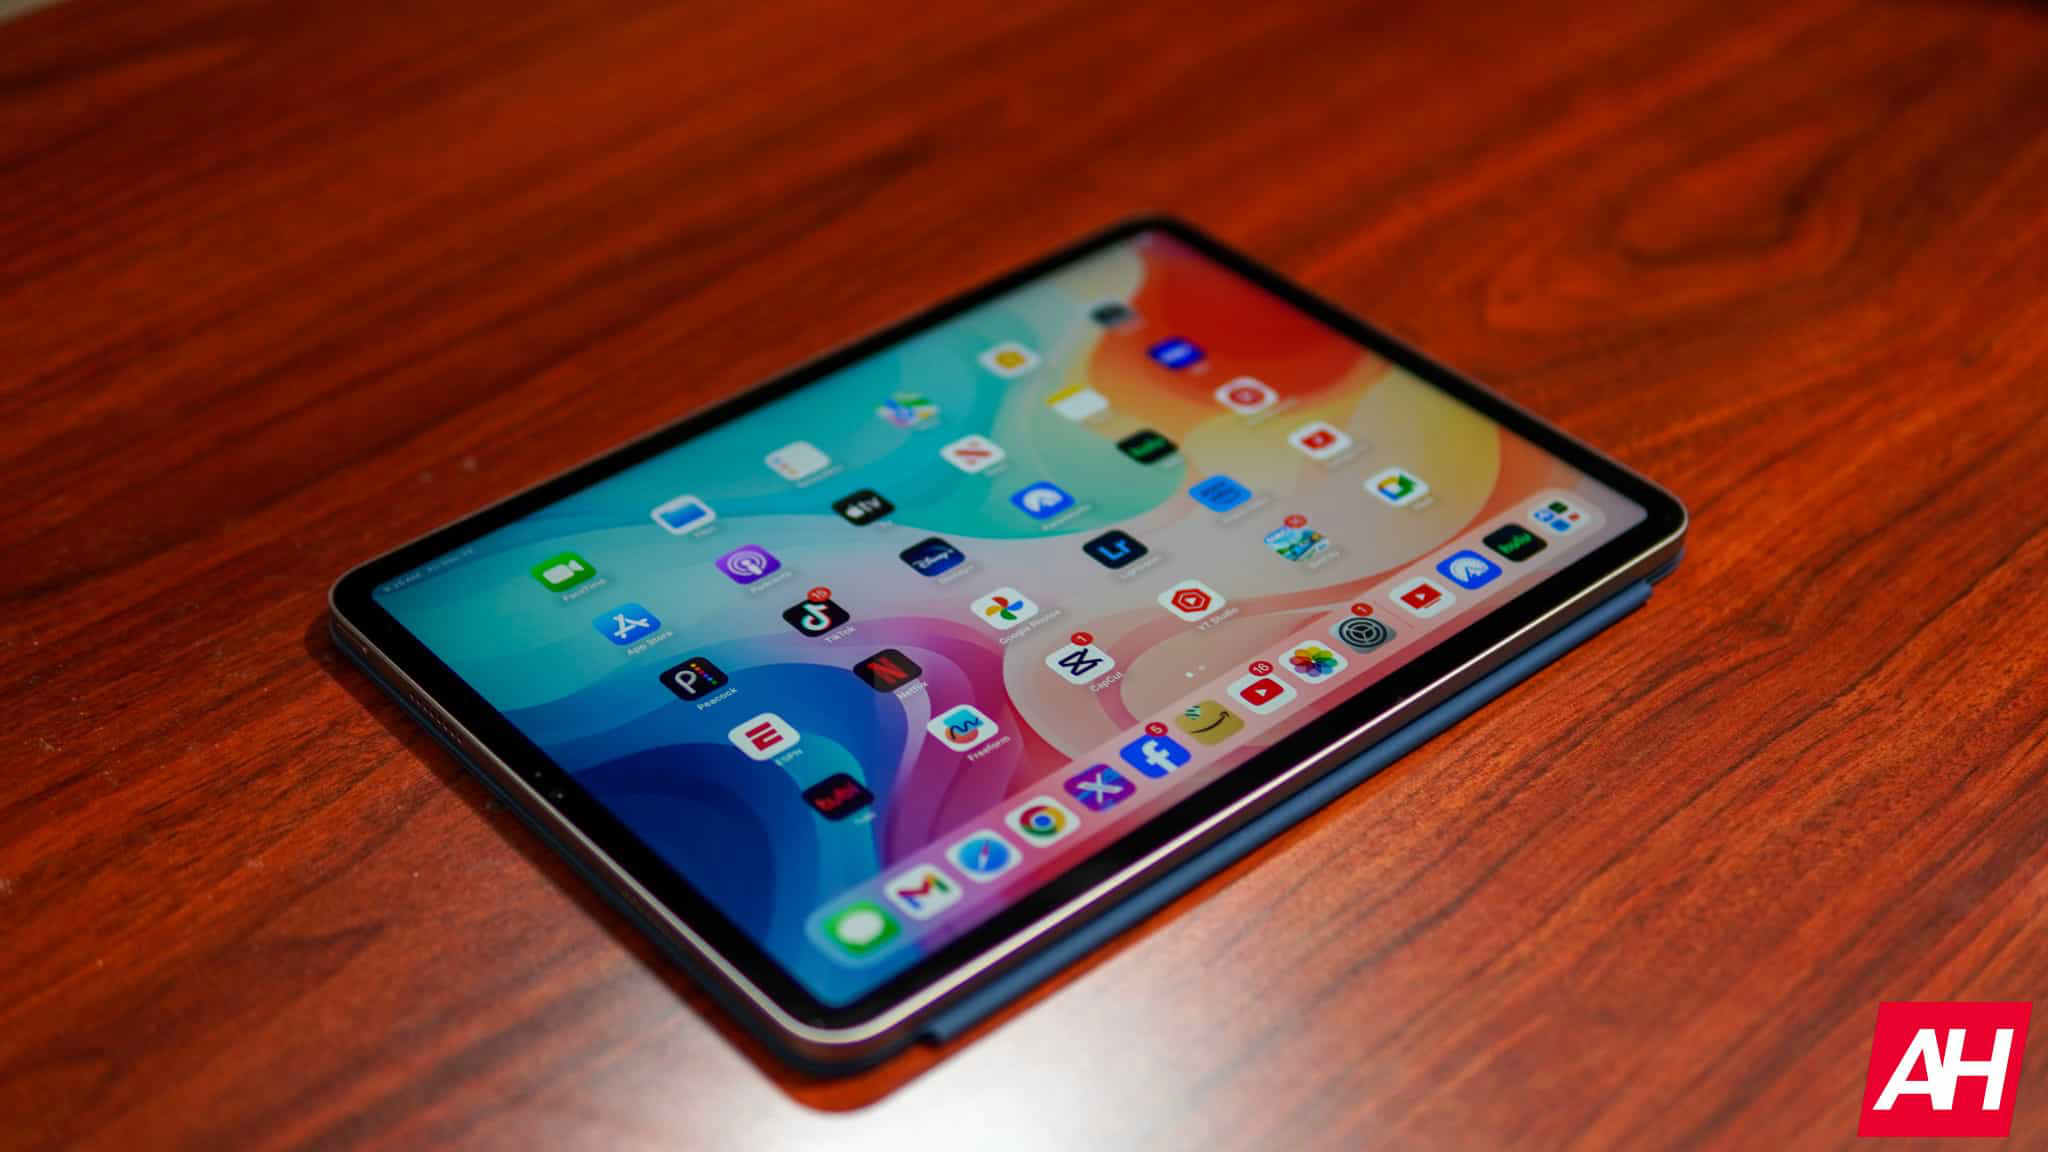 Apples Oled Ipad Pro Models Could Start At 1500 In Price Leap 